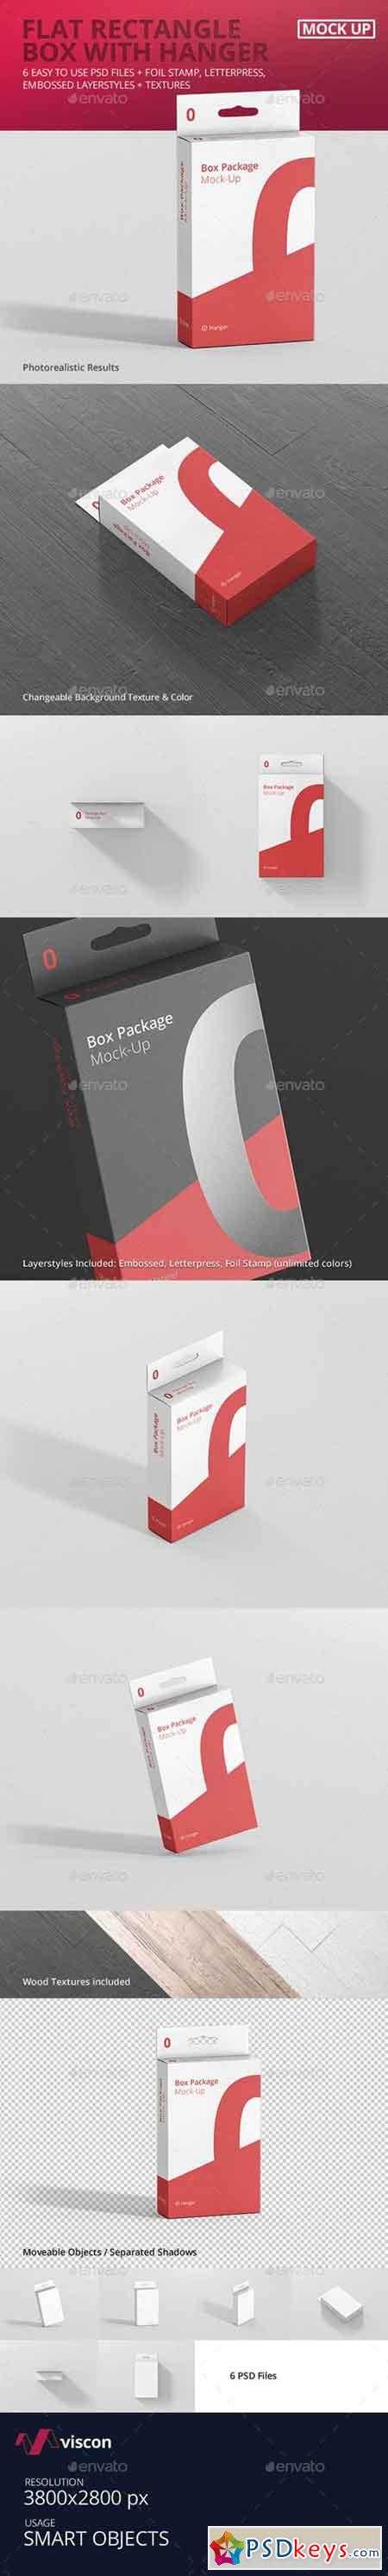 Package Box Mock-Up - Flat Rectangle with Hanger 17920401